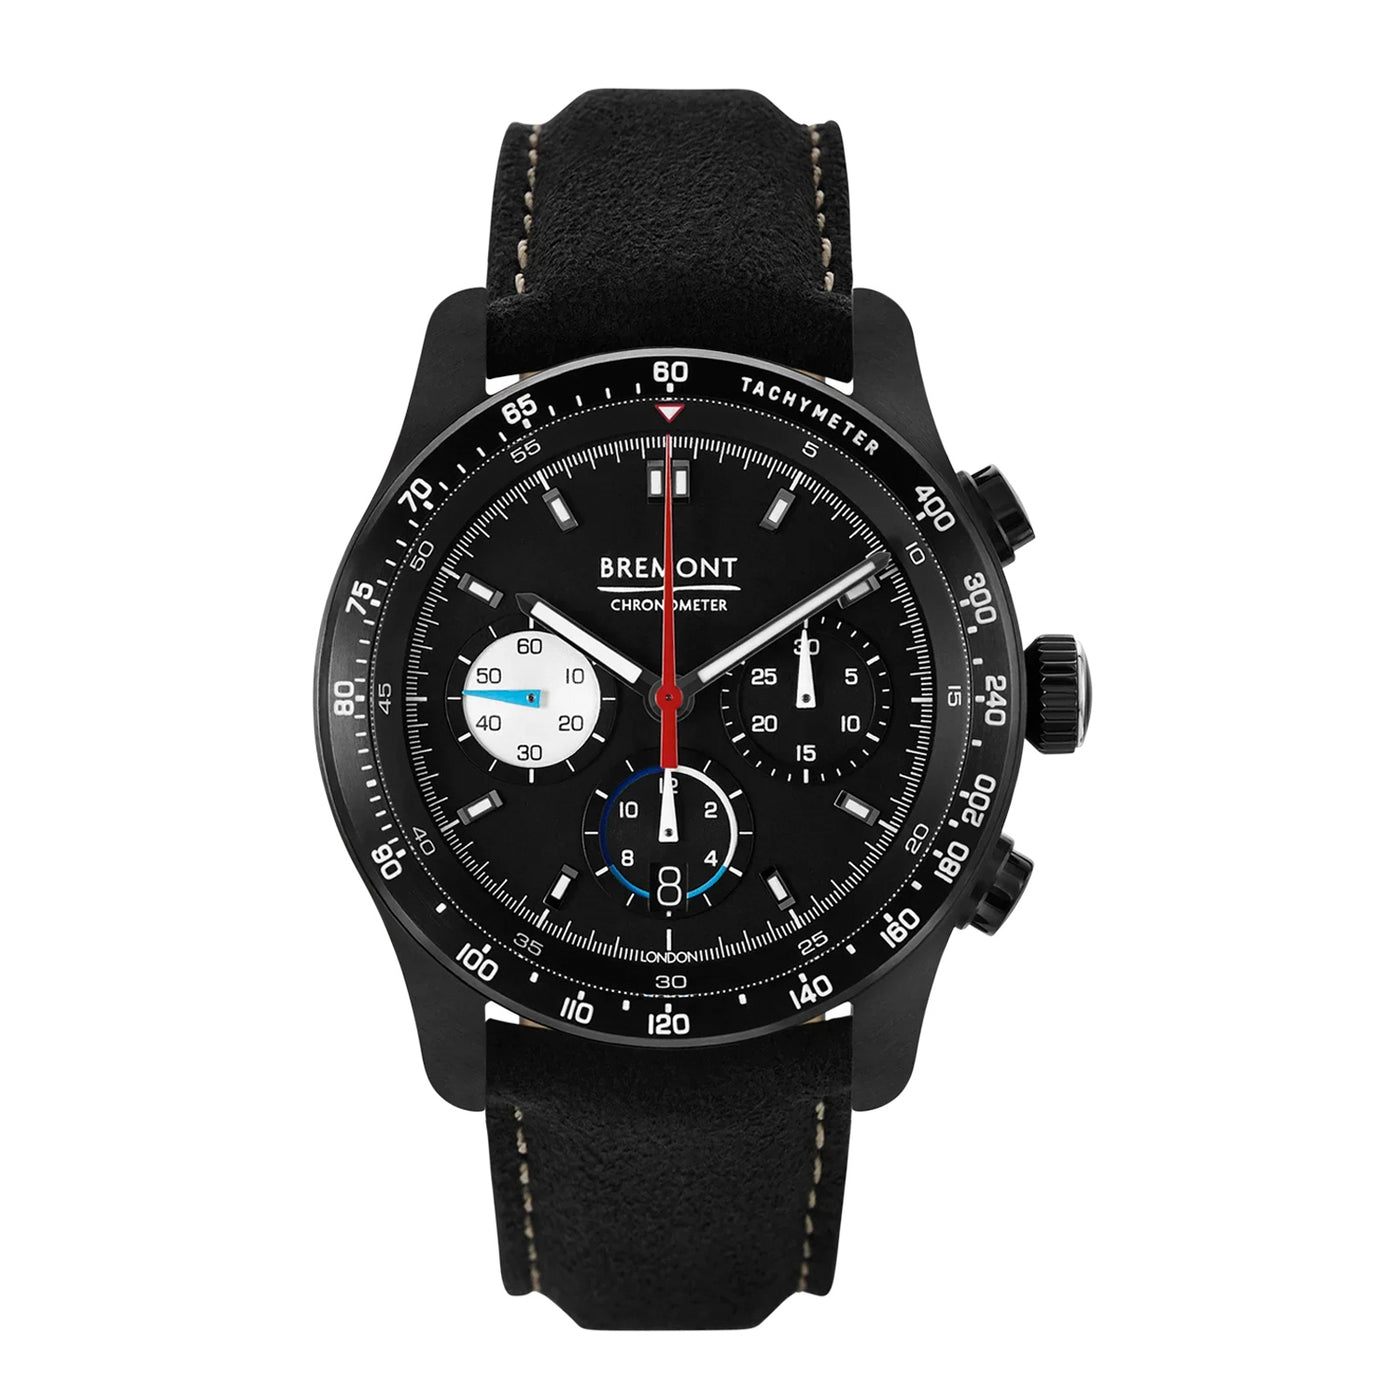 Bremont Williams Racing Automatic – WR-45-R-S